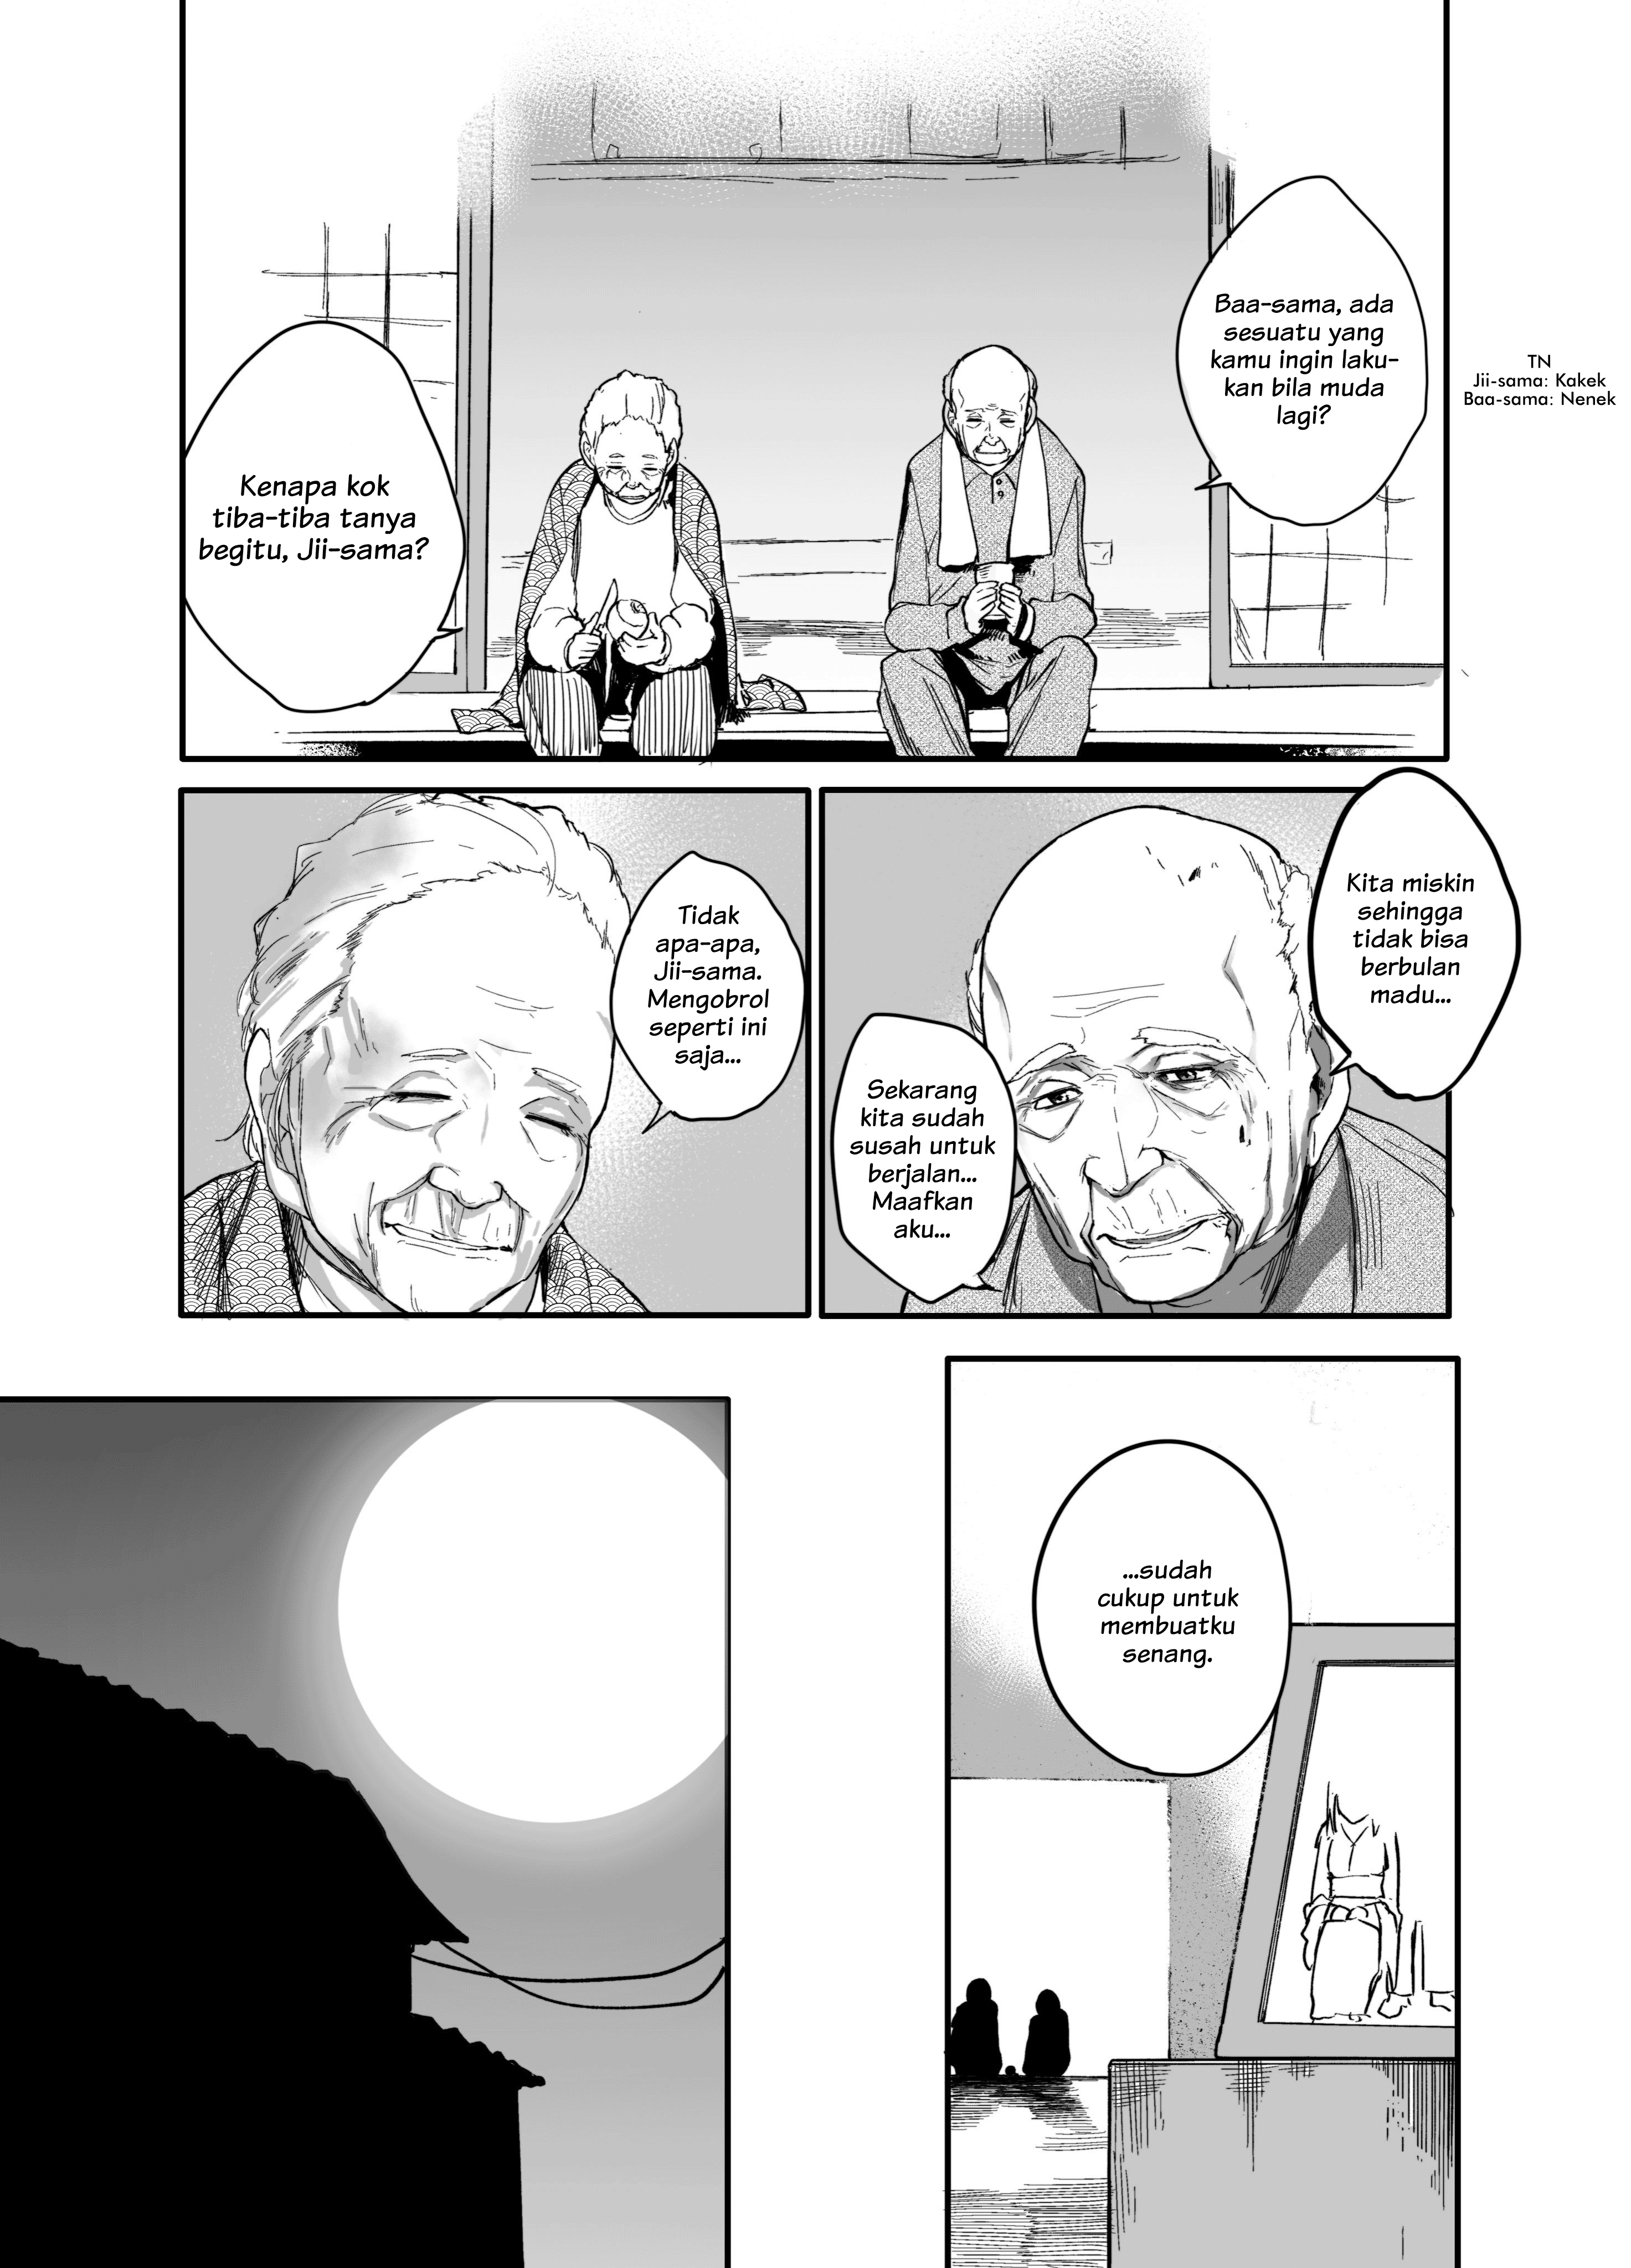 A Story About A Grampa and Granma Returned Back to their Youth. Chapter 1